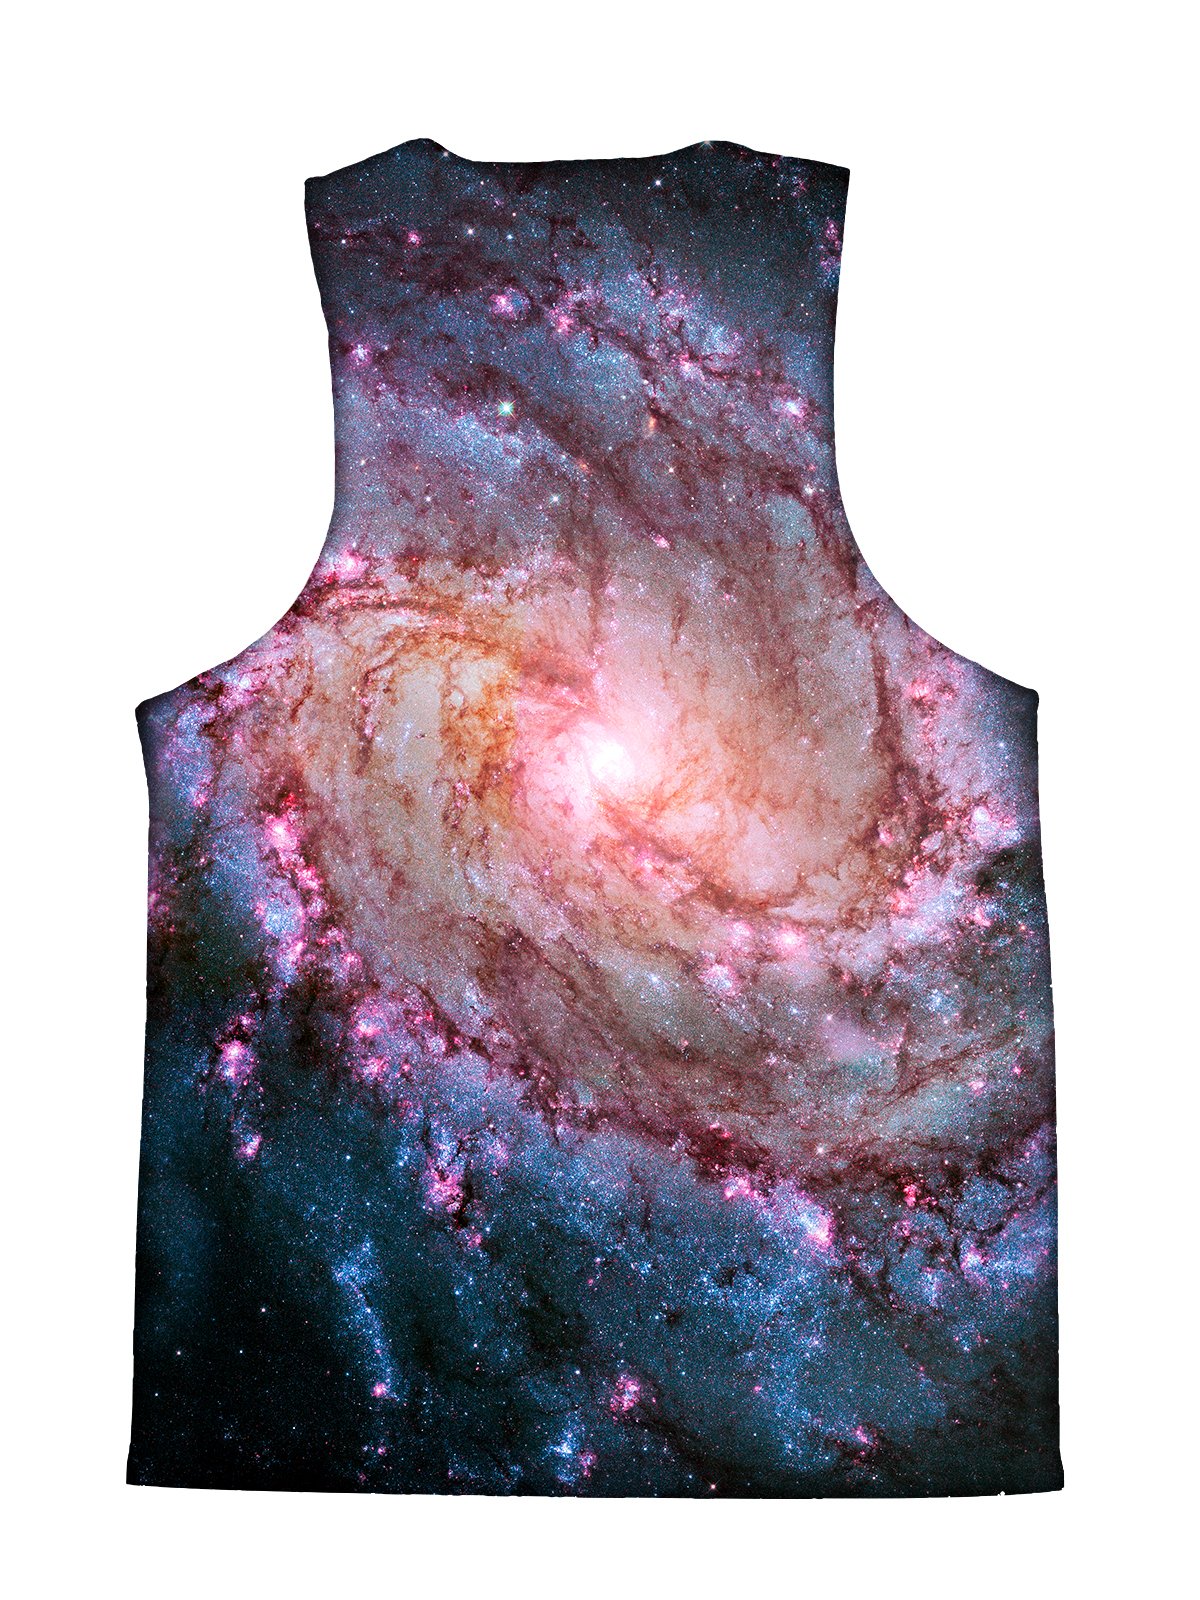 Psychedelic all over print space tank by GratefullyDyed Apparel back view.